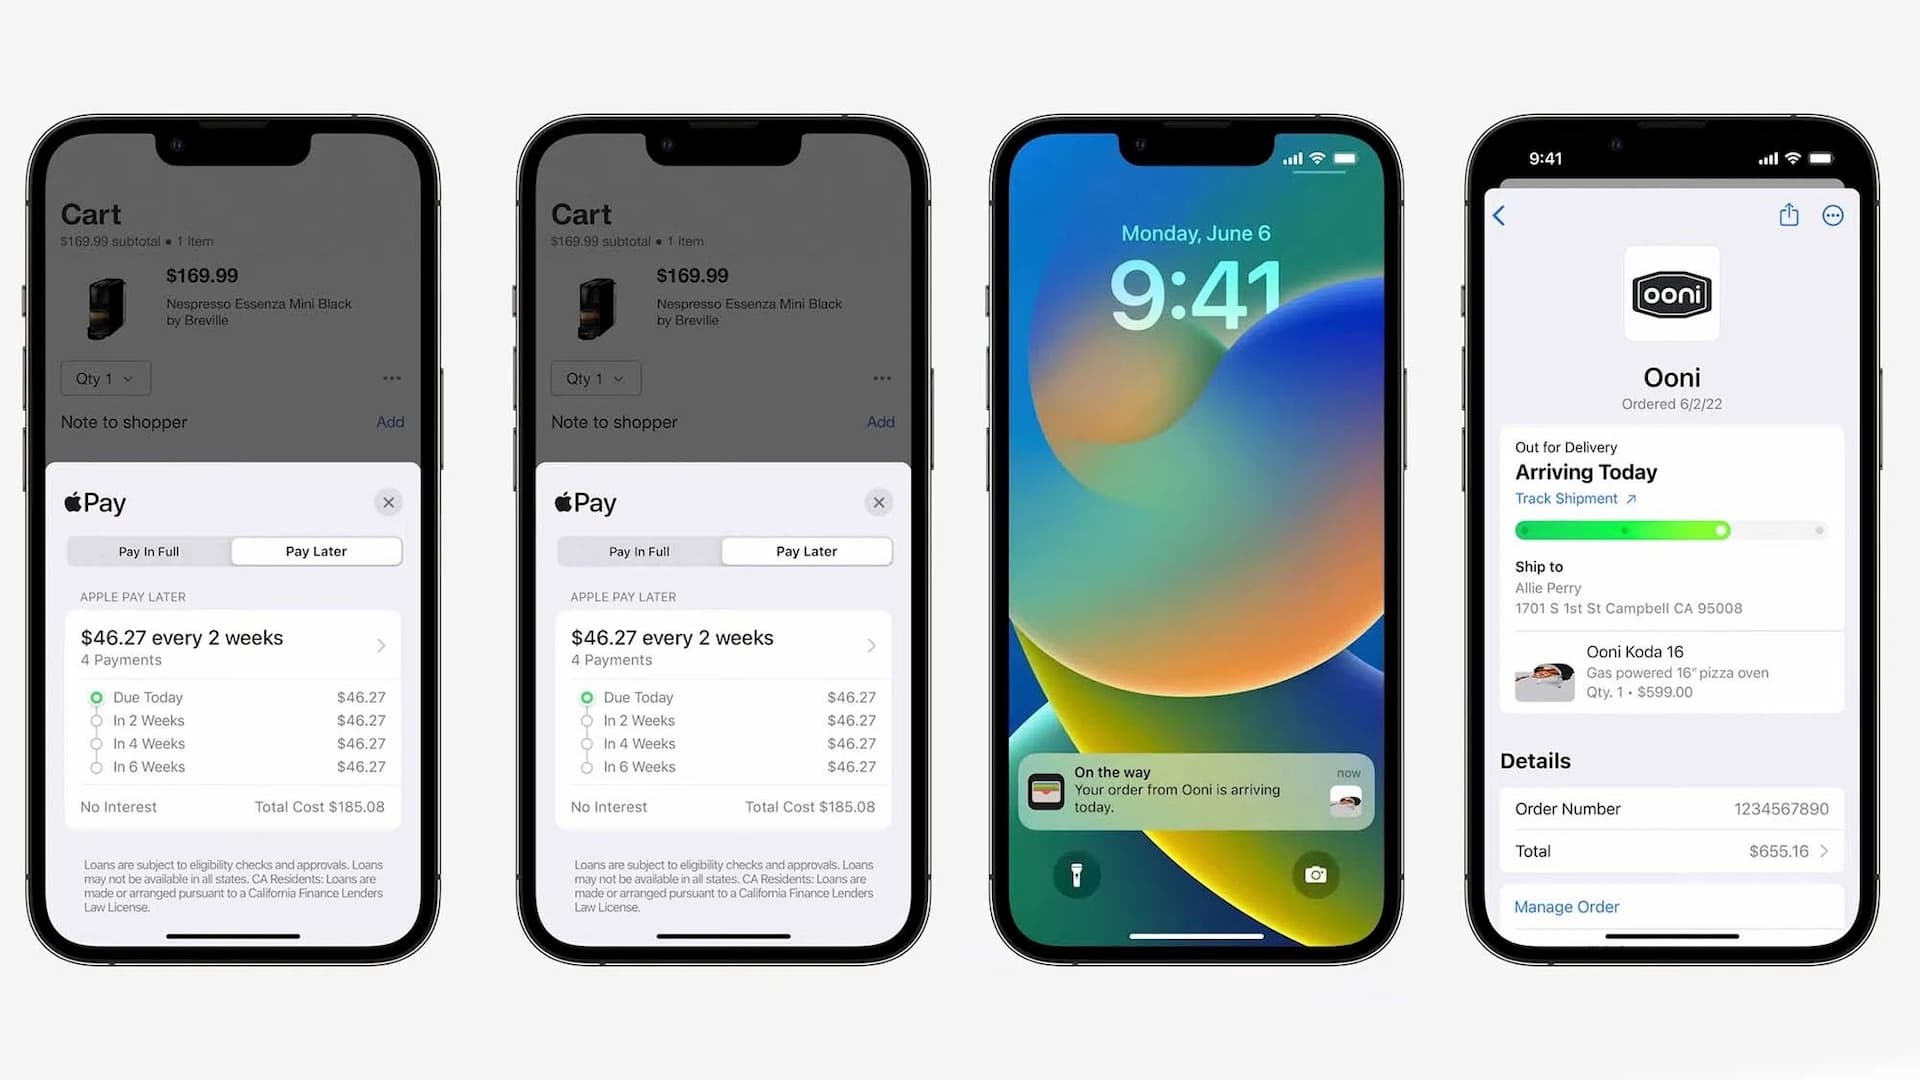 Apple Decided to Postpone Launch of Apple Pay Later to 2023